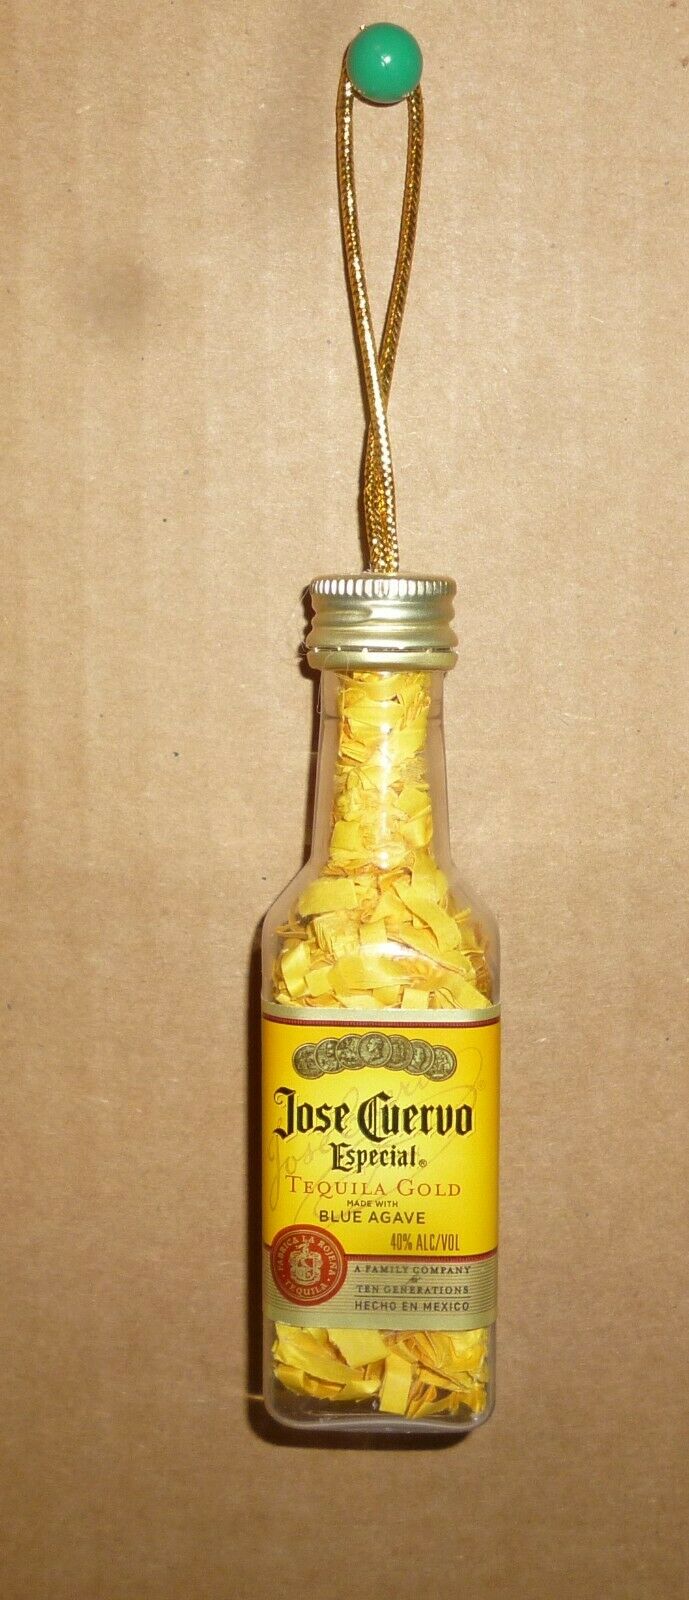 Tequila gold mini bottle Christmas decorations